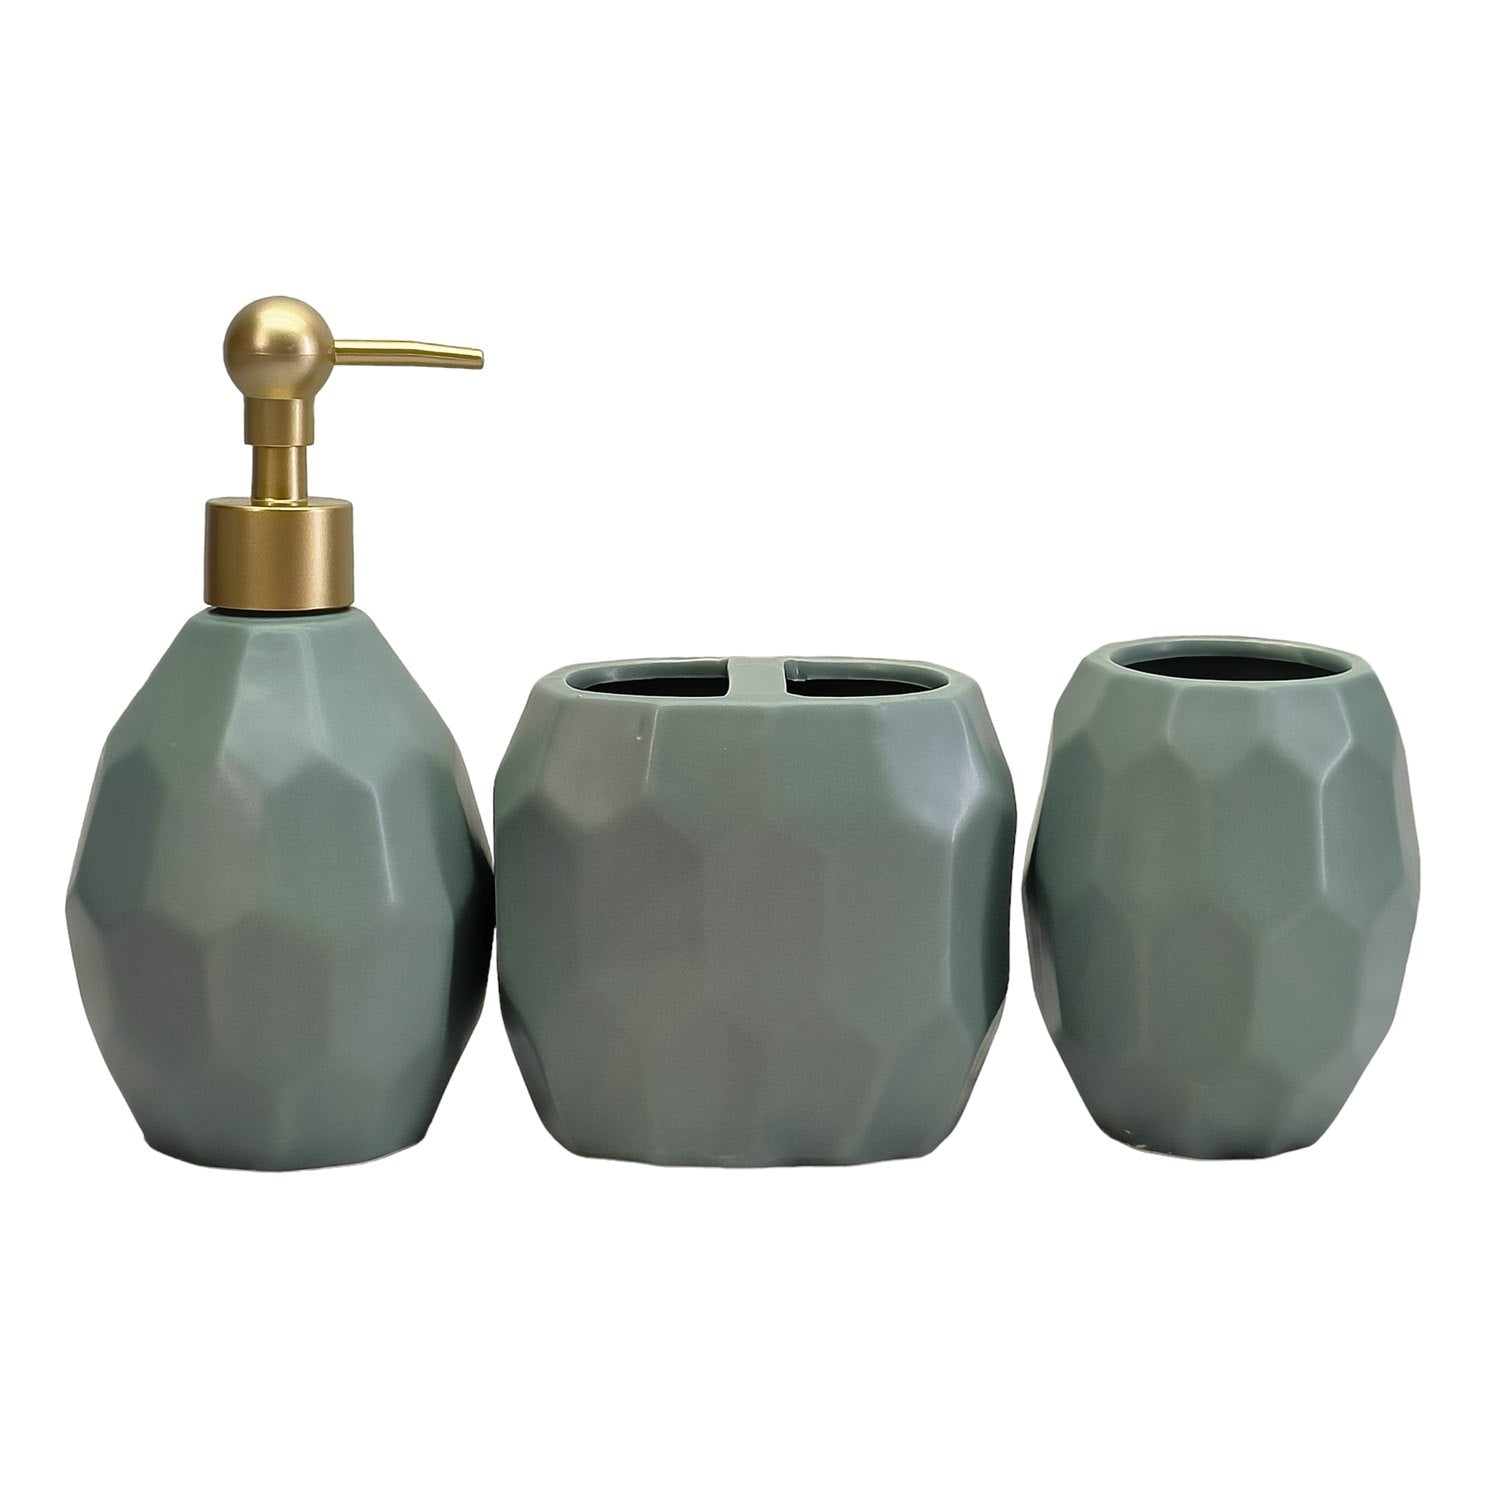 Ceramic Soap Dispenser Set with Toothbrush Holder and Tumbler, Set of 3 Bathroom Accessories for Home (C3055)